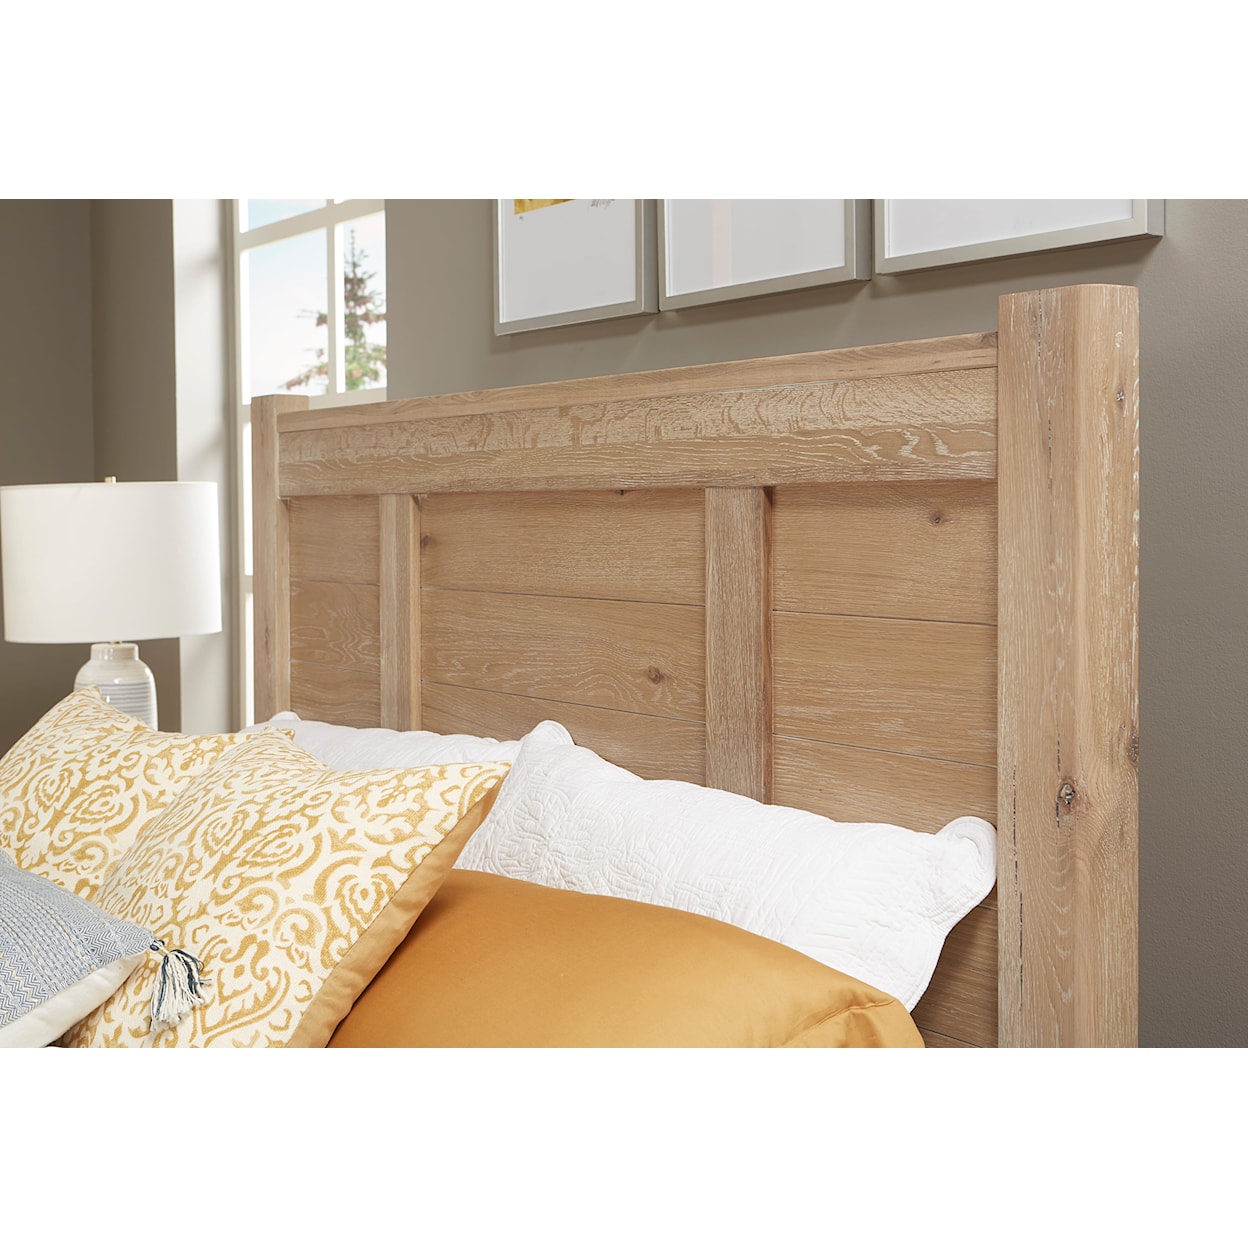 Laurel Mercantile Co. Crafted Oak California King Poster Bed